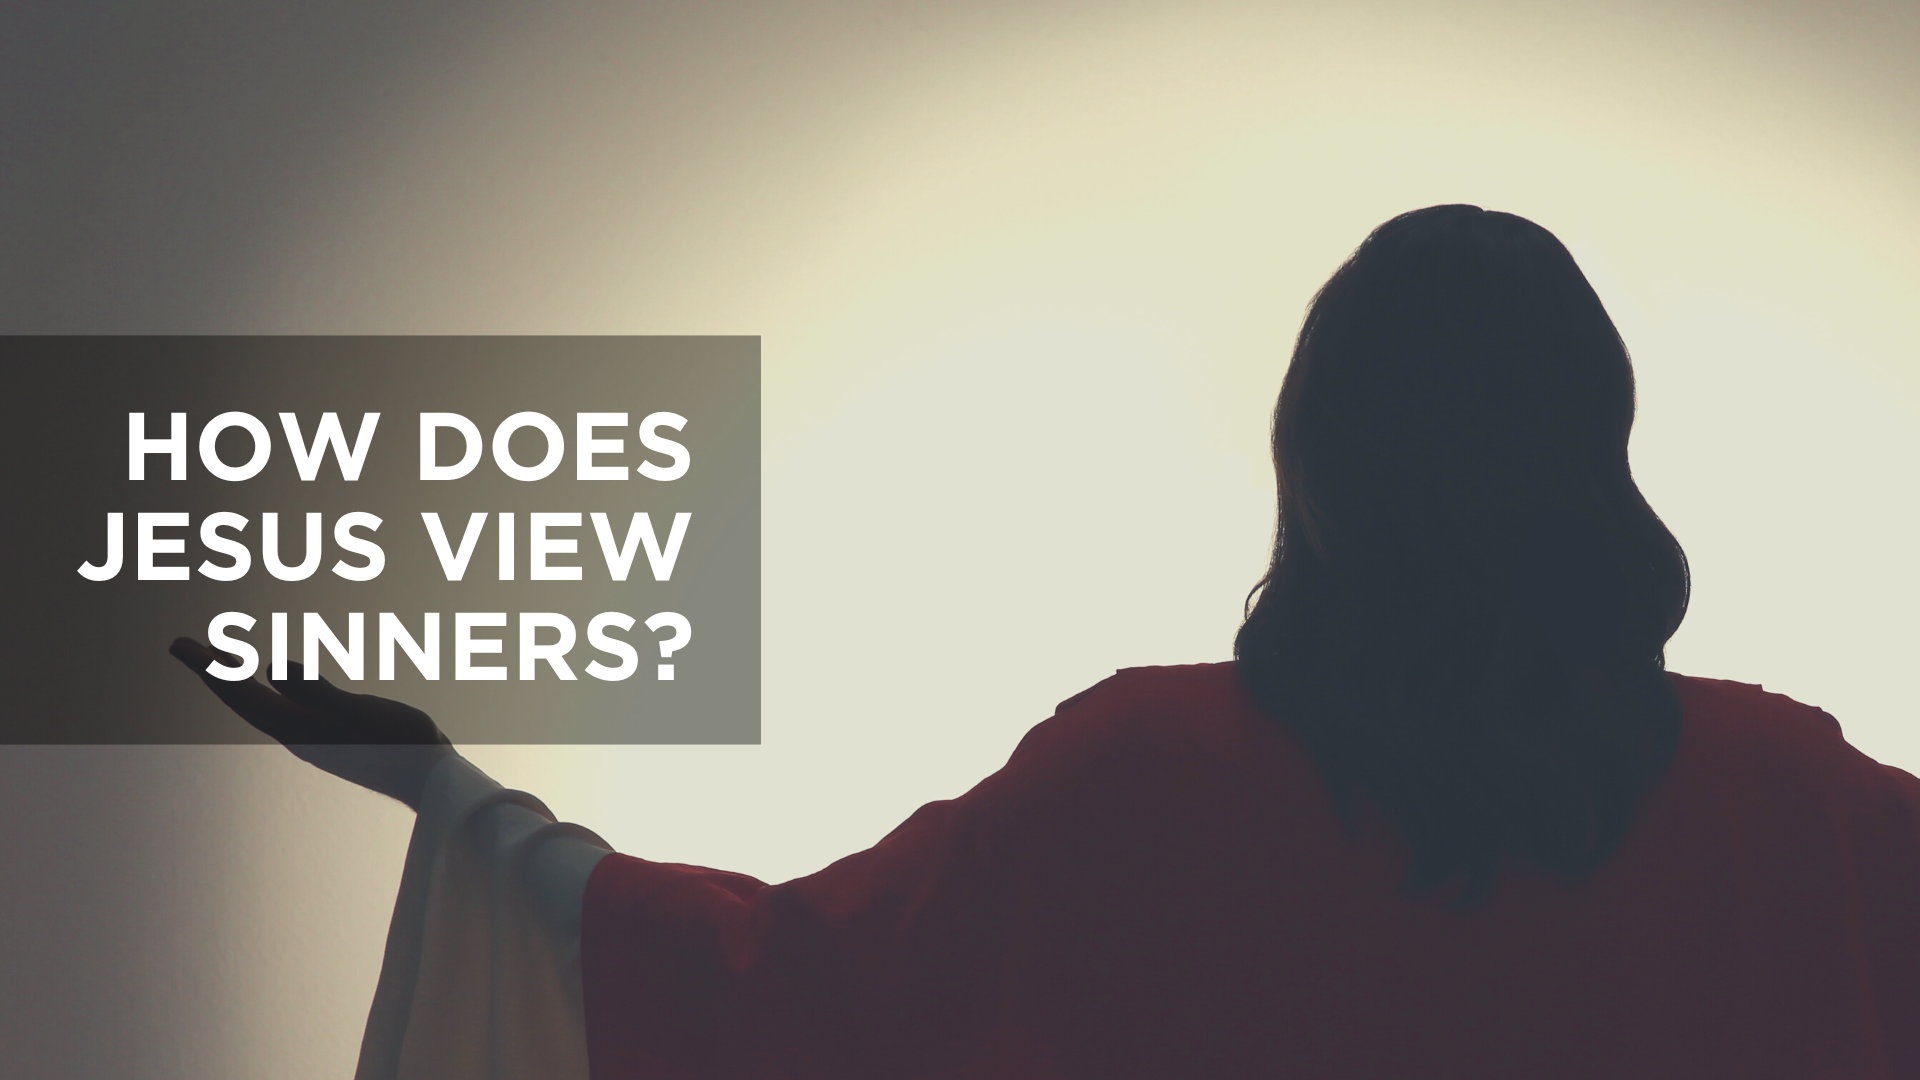 How Does Jesus View Sinners?